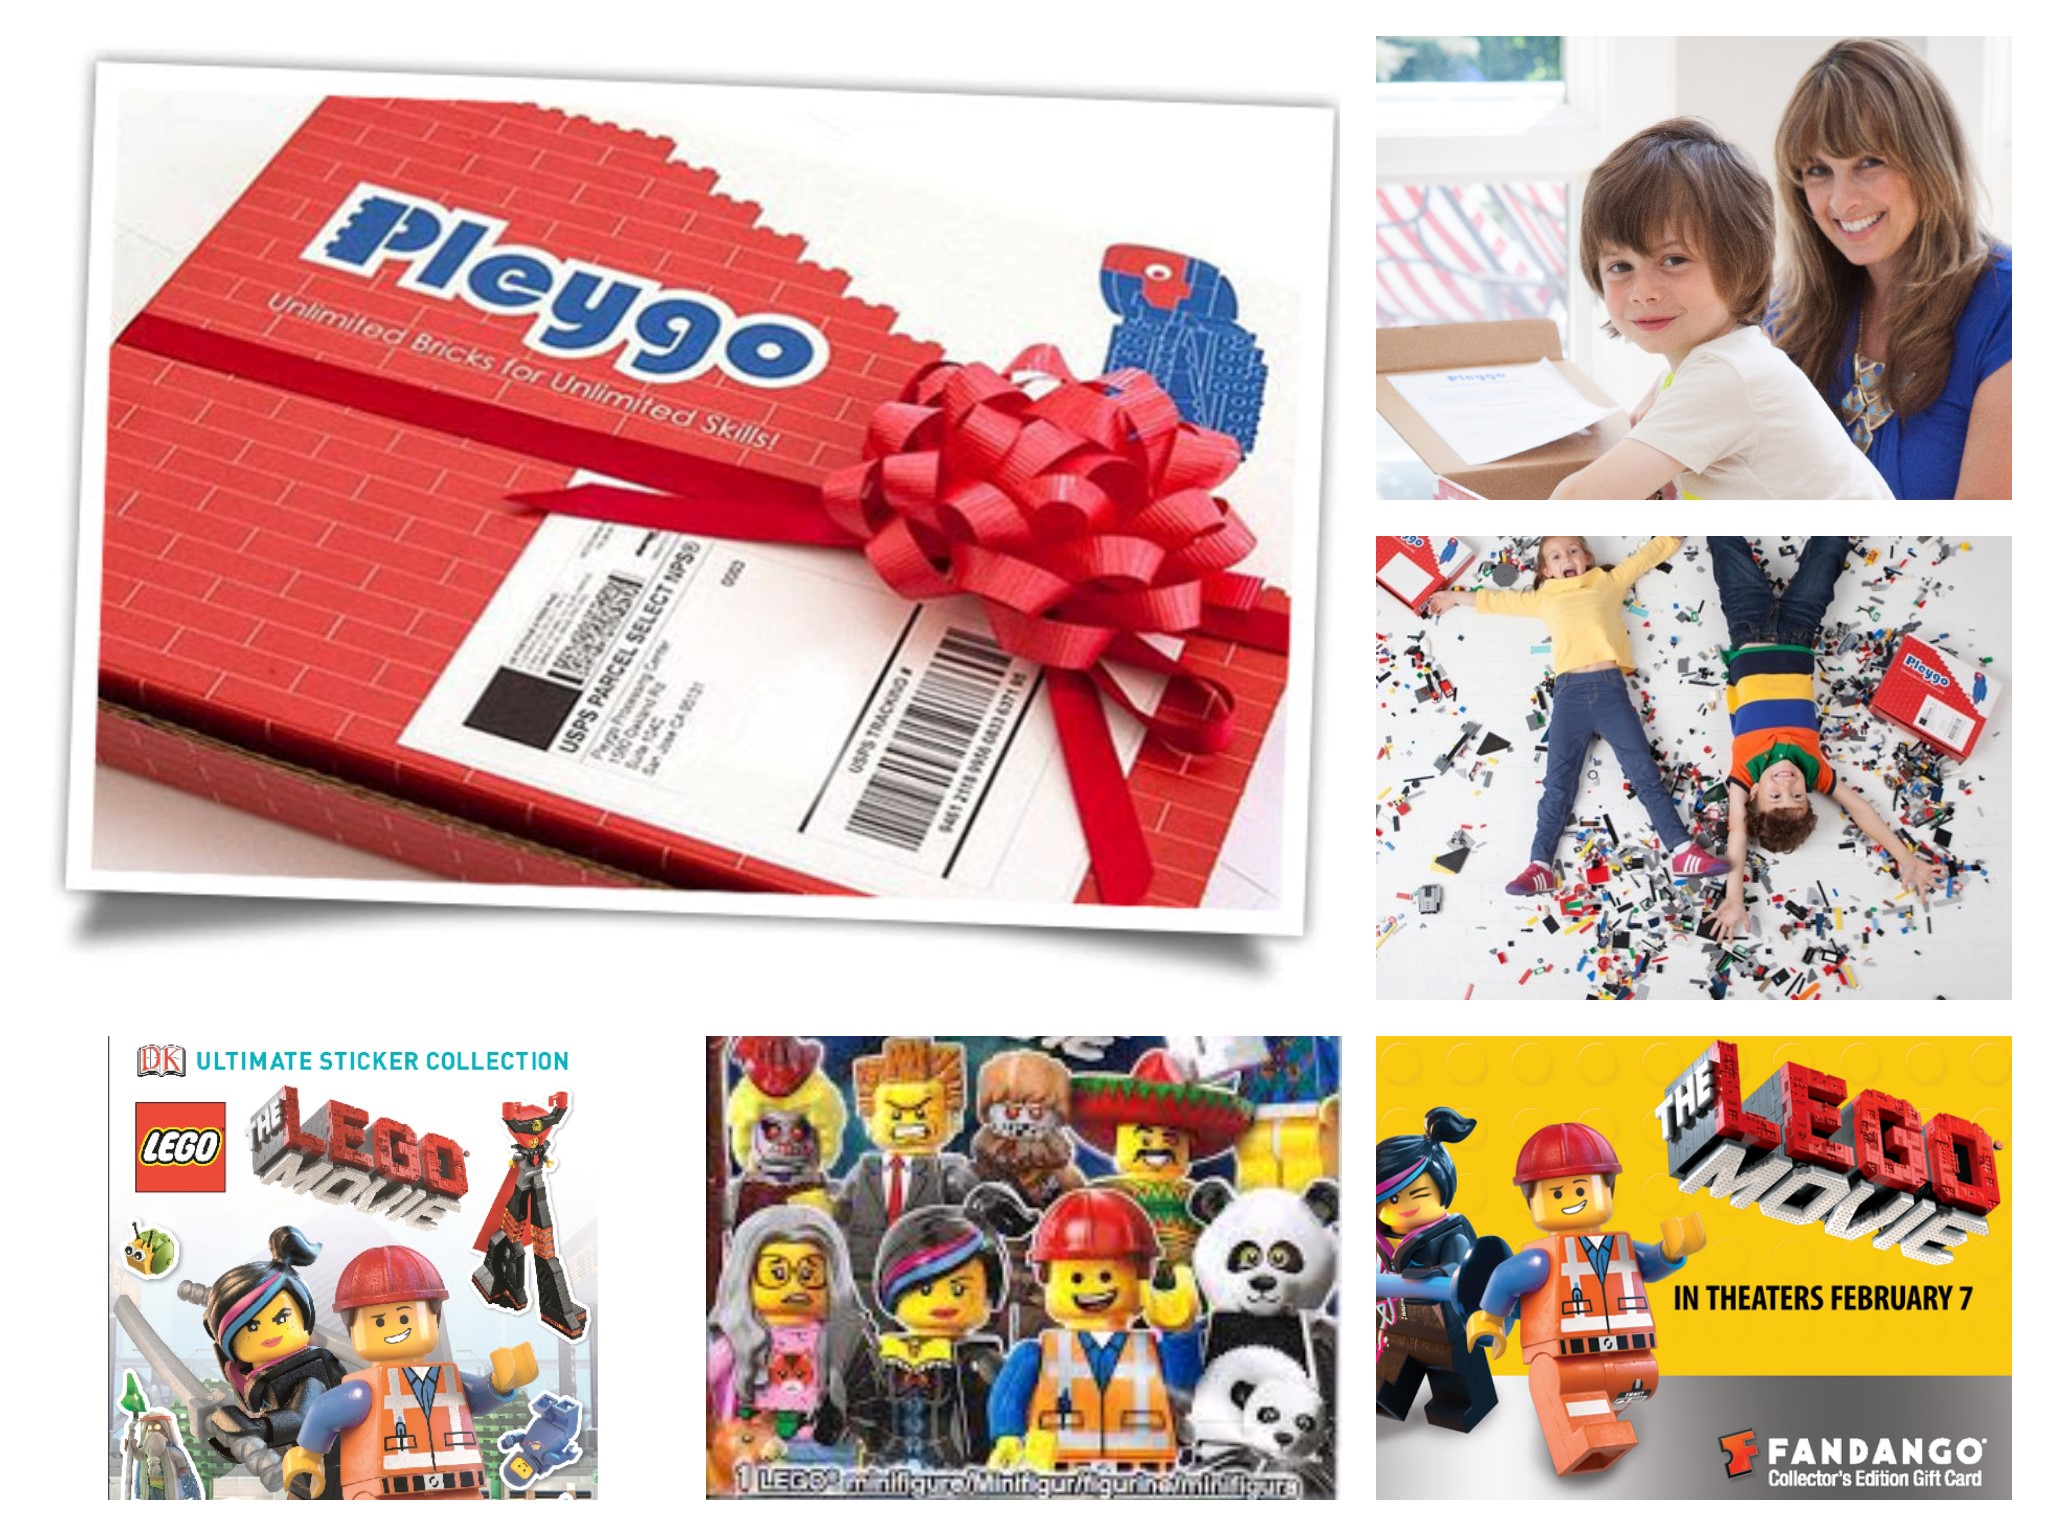 Geek insider, geekinsider, geekinsider. Com,, pleygo launches giveaway in honor of lego movie! , contests